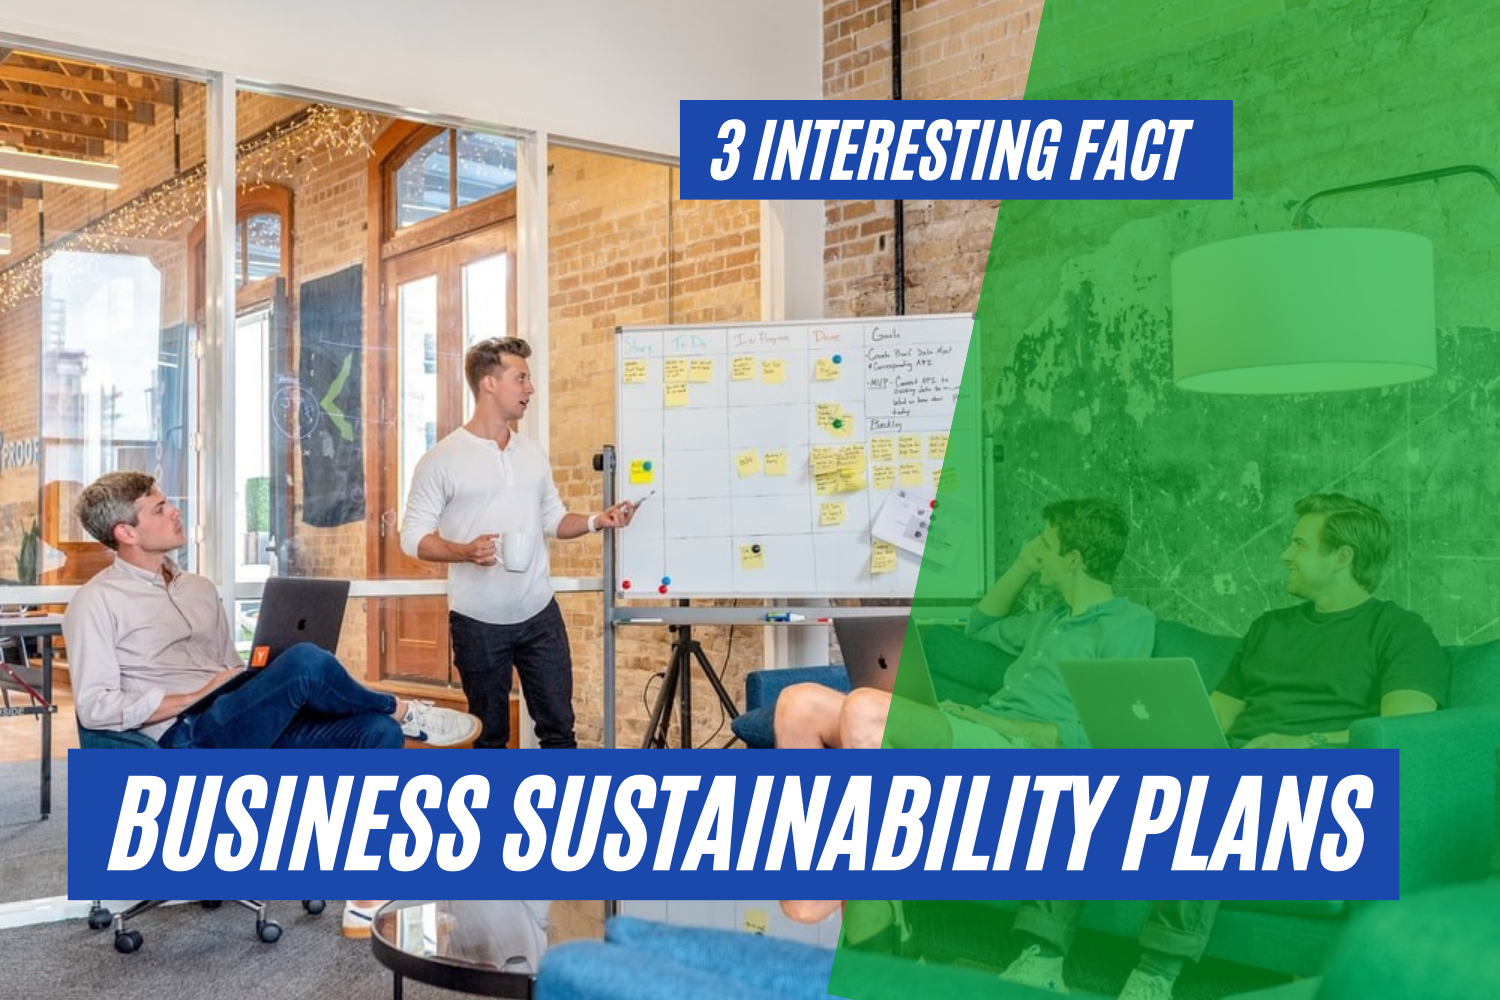 3 Interesting Facts about Business Sustainability Plans & their Effectiveness